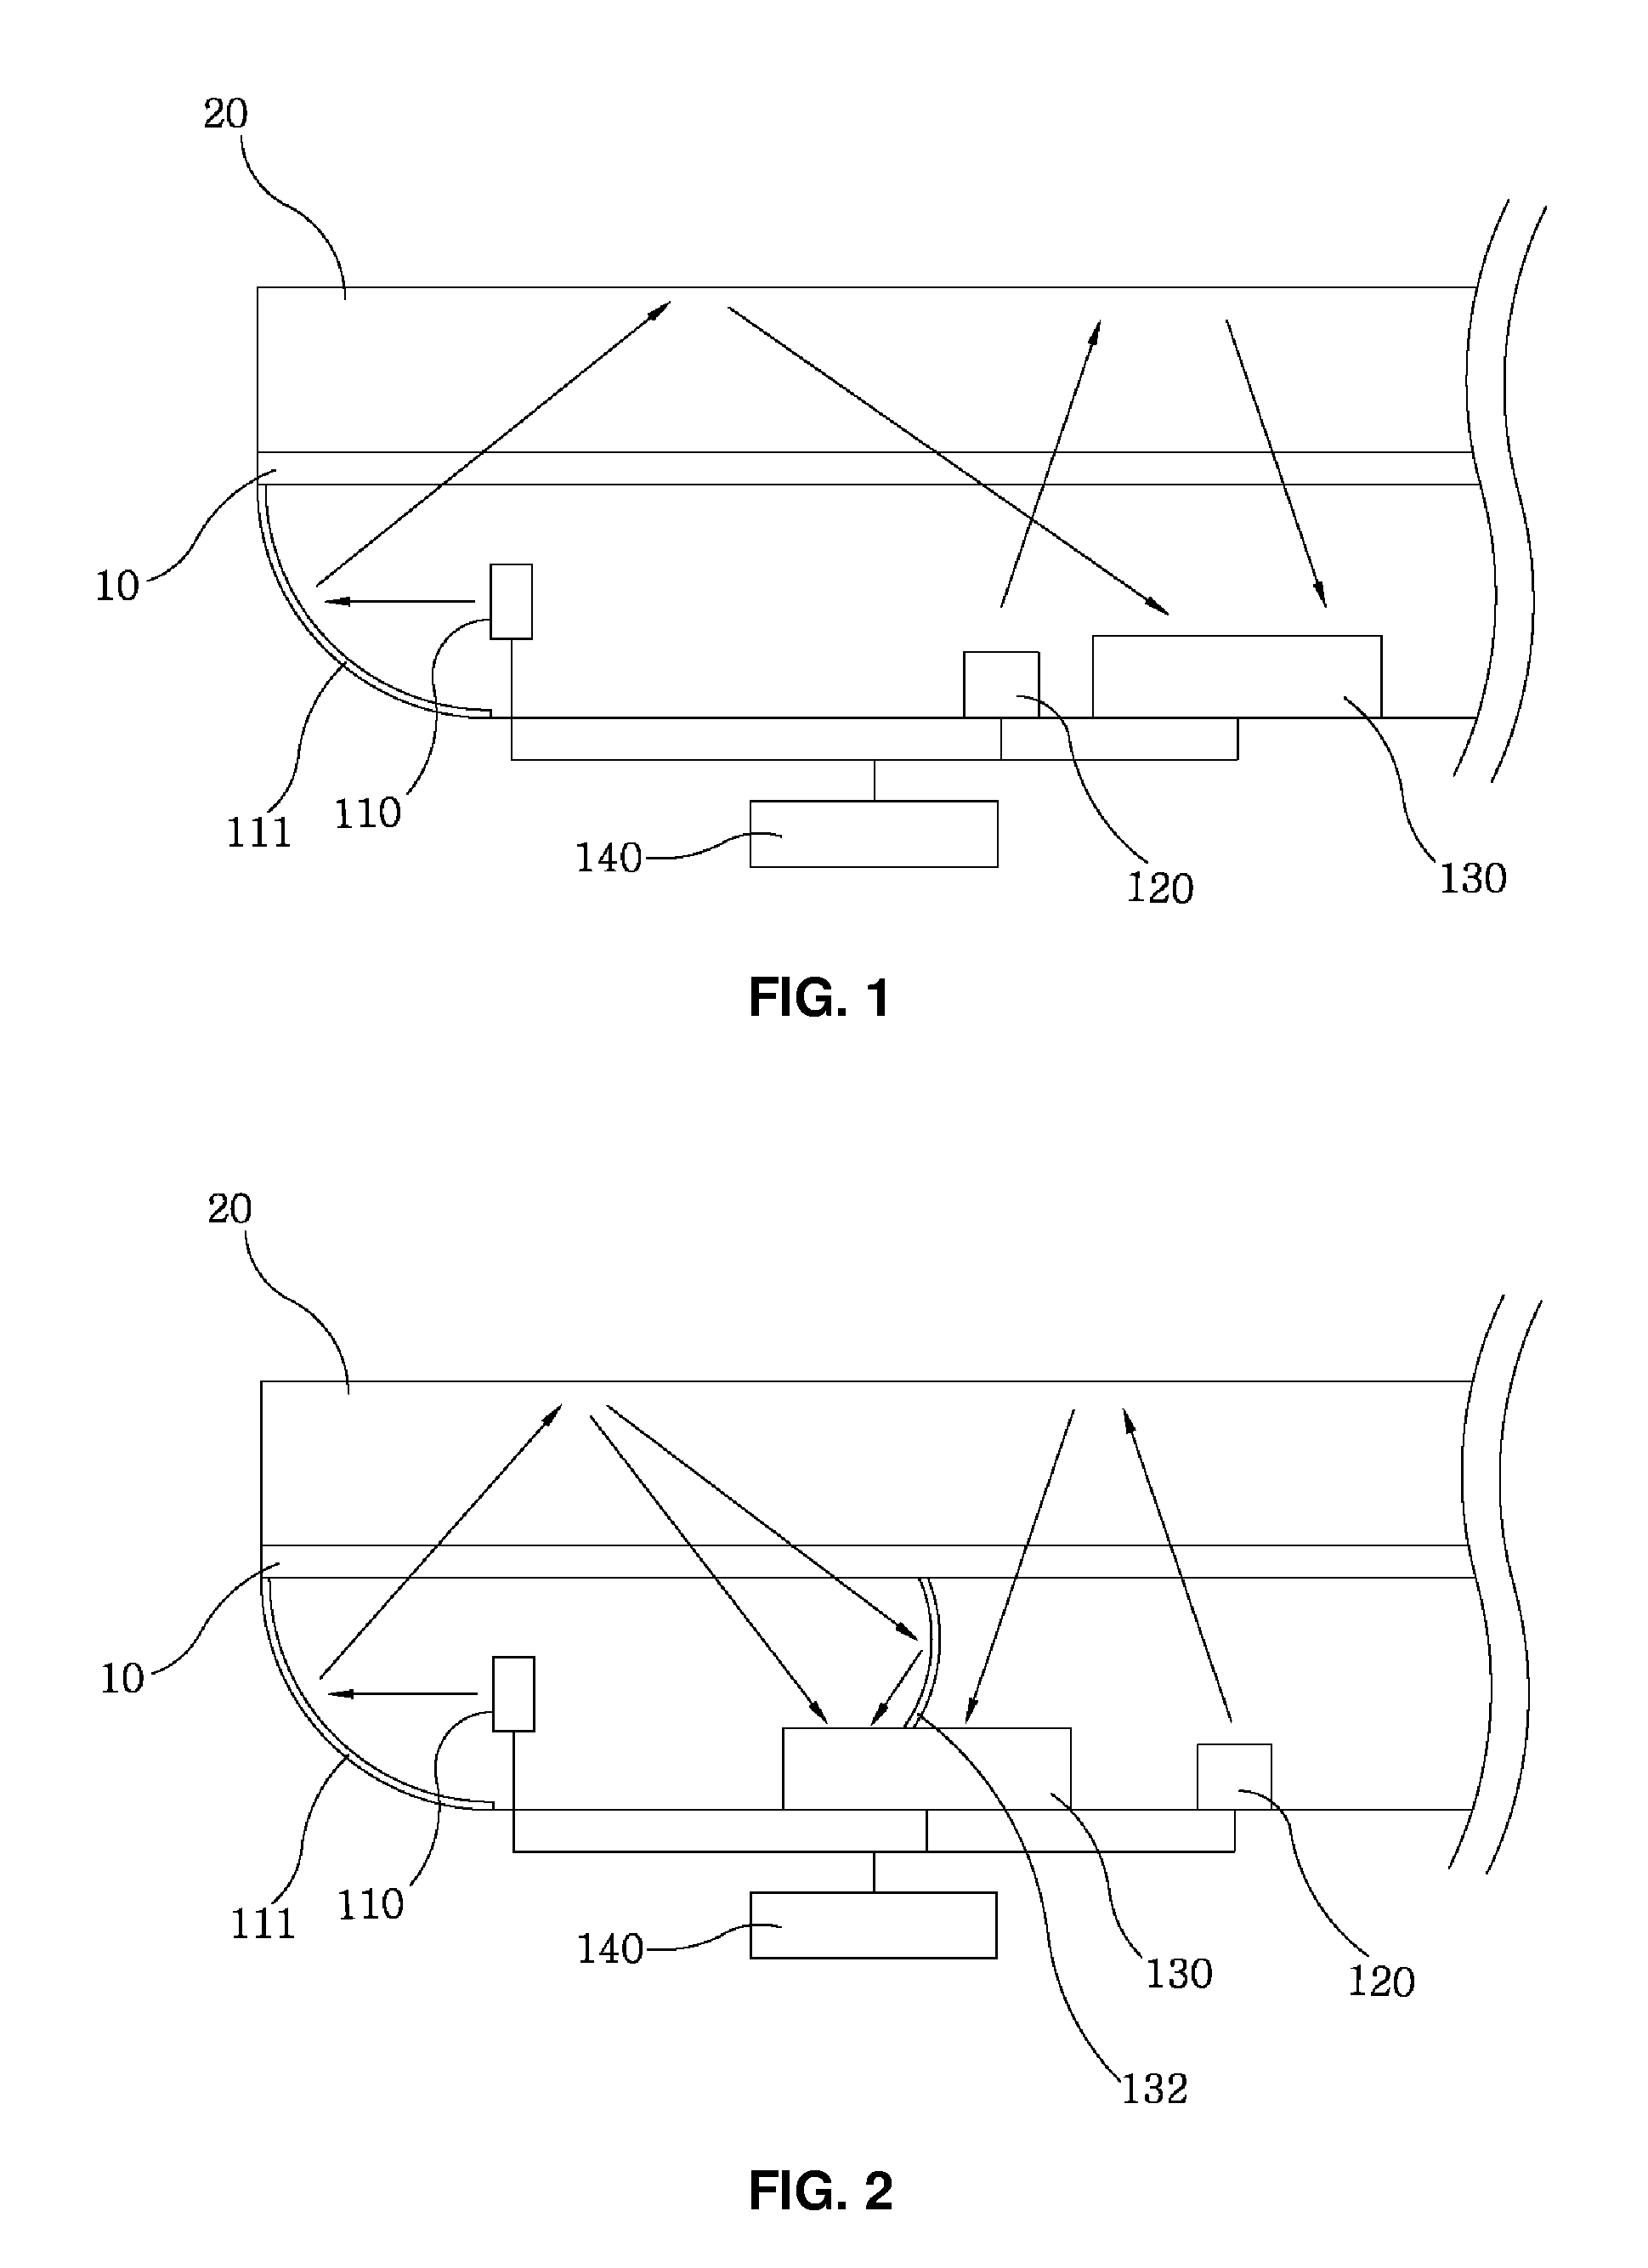 One body type rain sensor with reflection type sensor for detecting external object